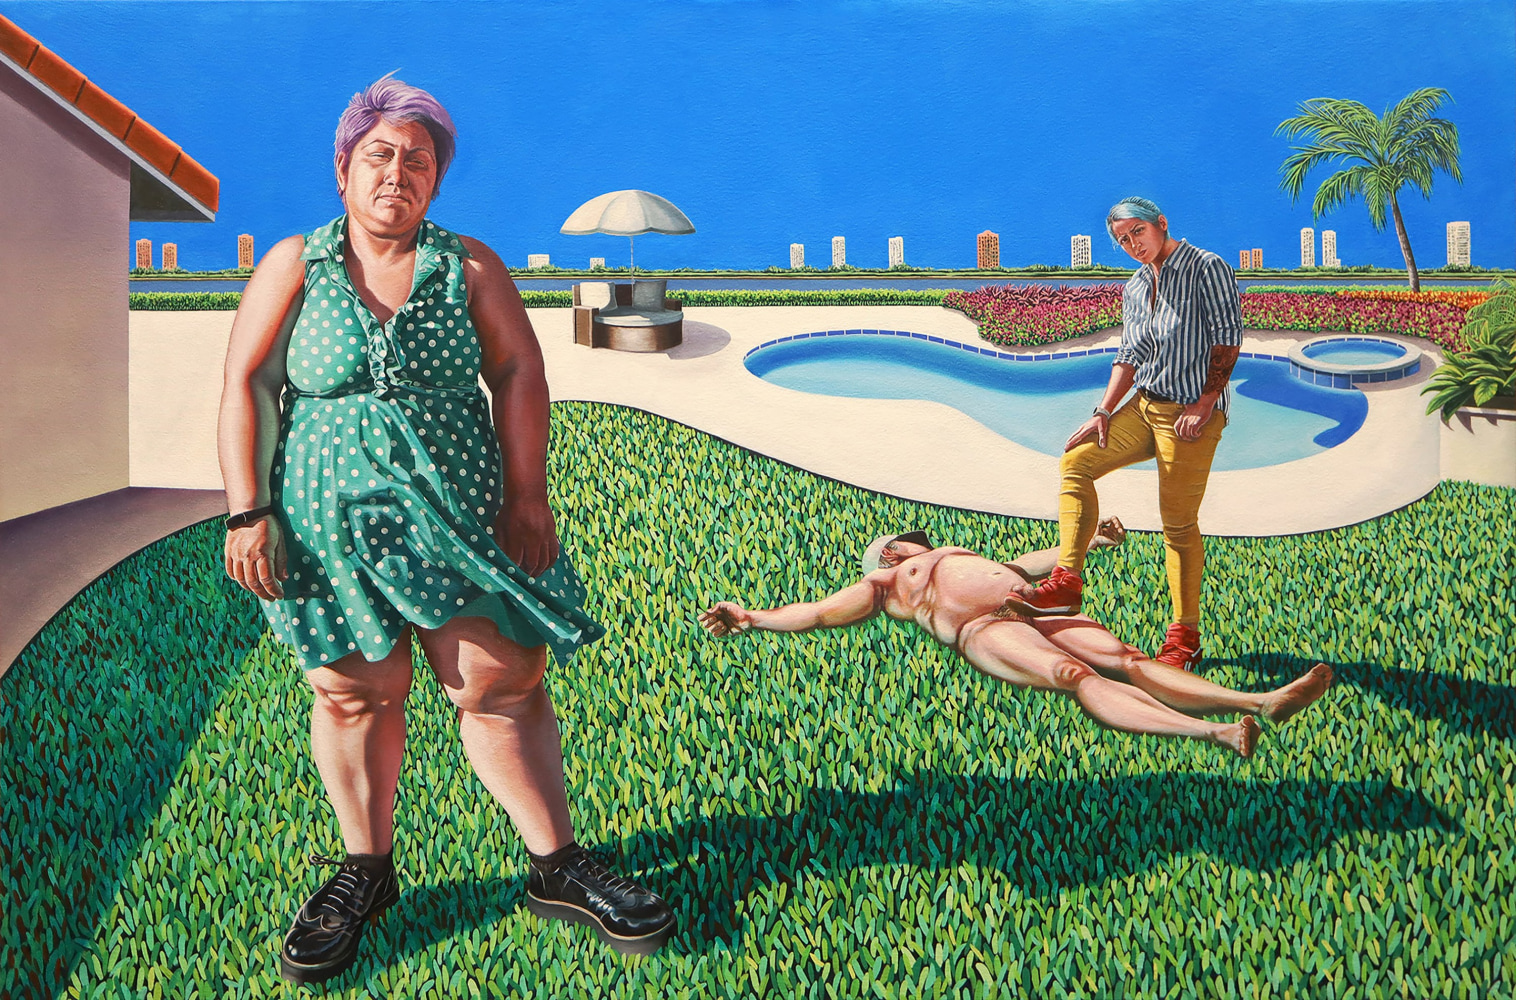 Soy Playera Pero No Hay Playa (I&amp;#39;m a Beachgoer, But There&amp;#39;s No Beach), 2022

Oil on canvas

45.50h x 68w in